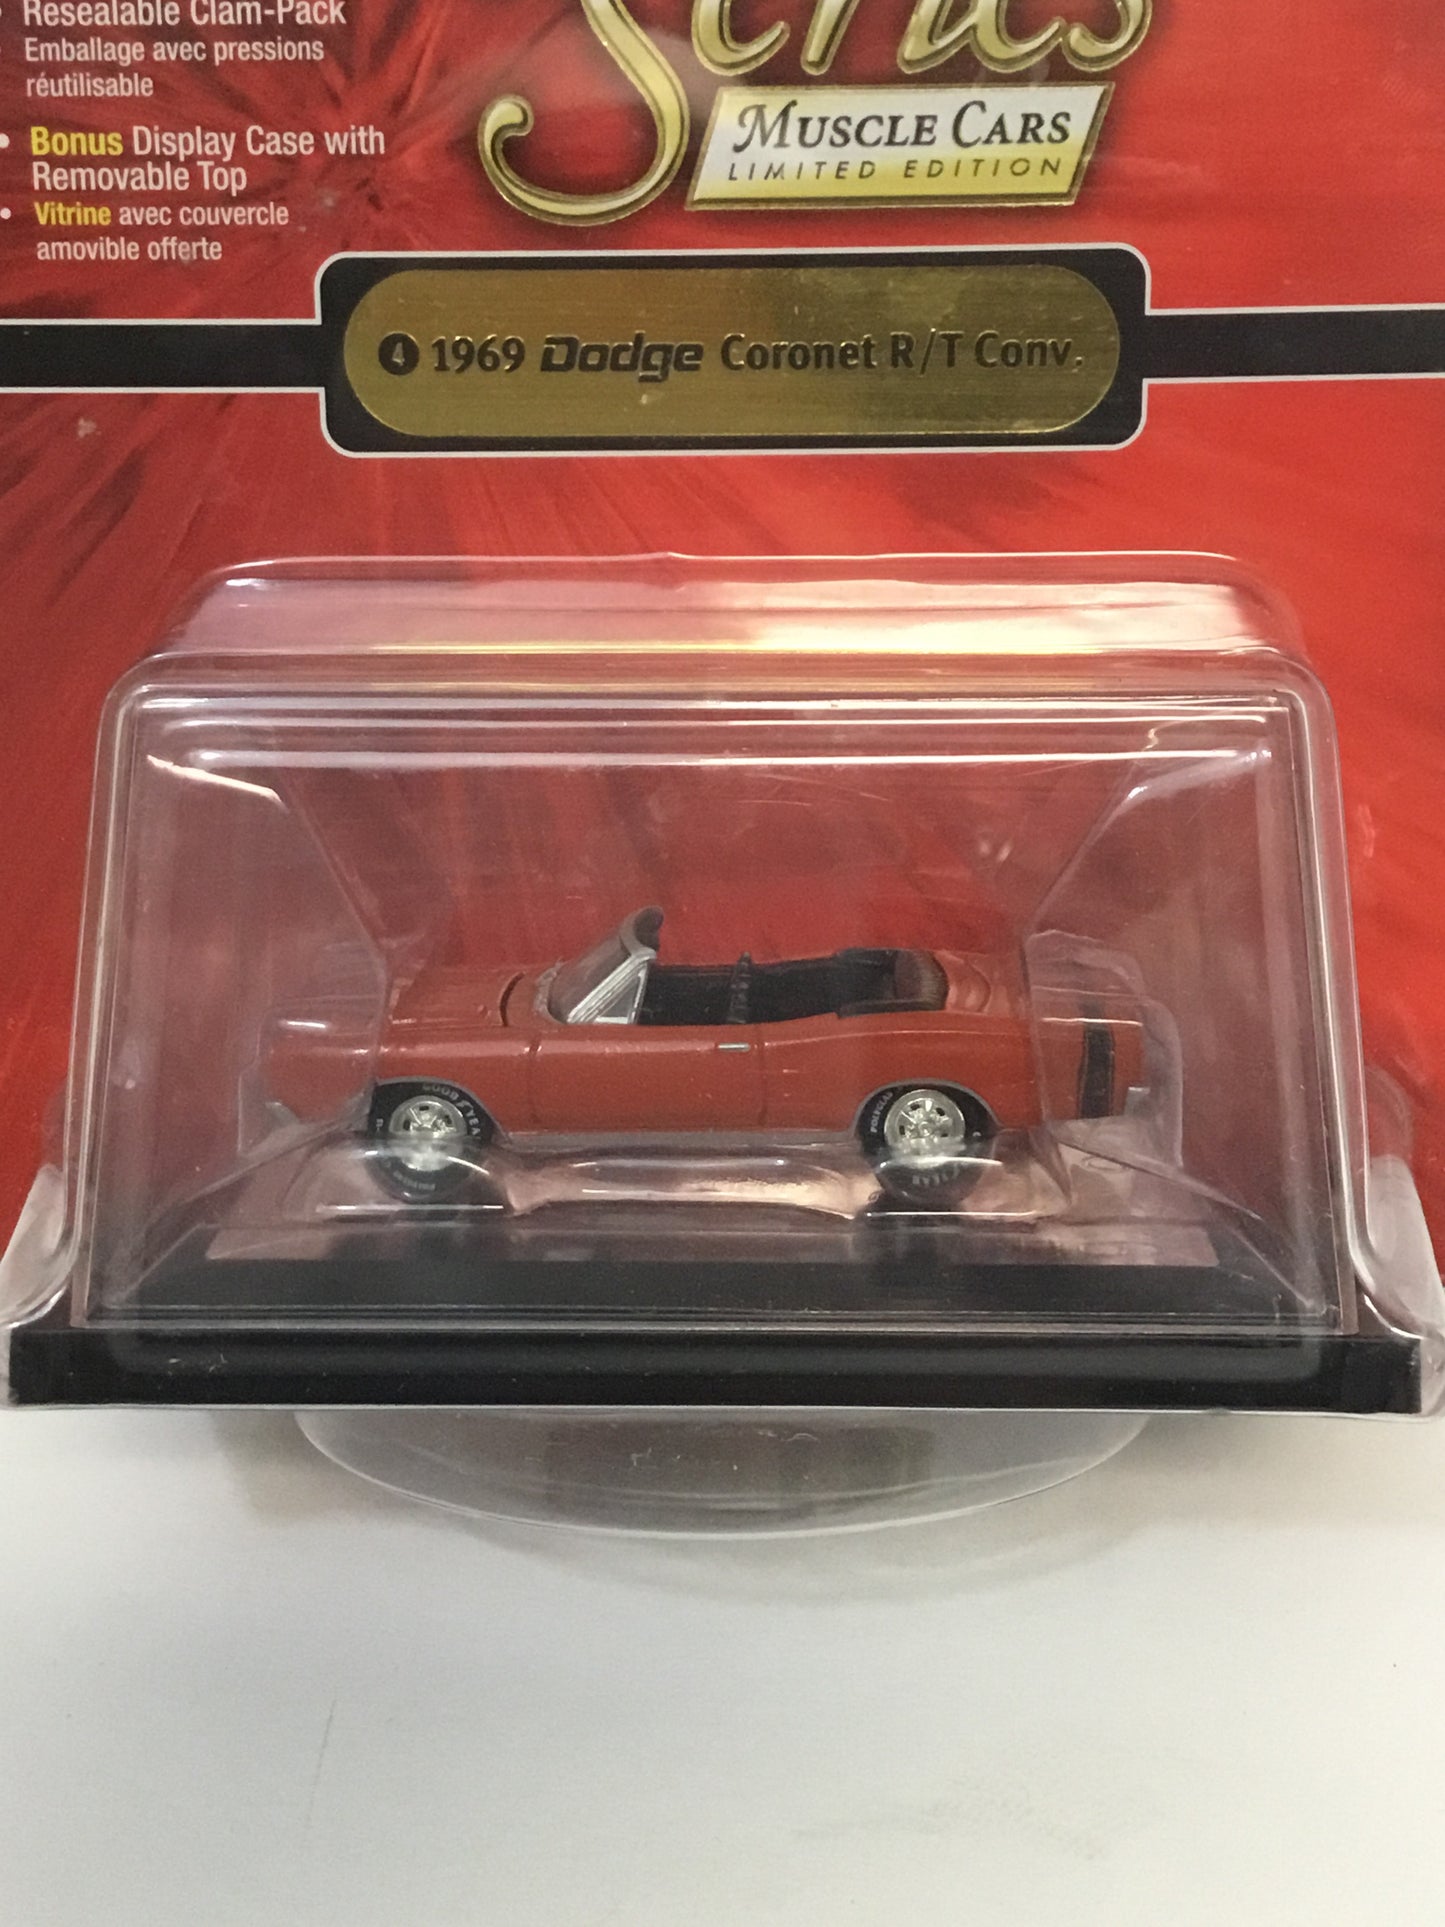 Johnny Lightning Gold series muscle cars 1969 dodge coronet R/T convertible 209G